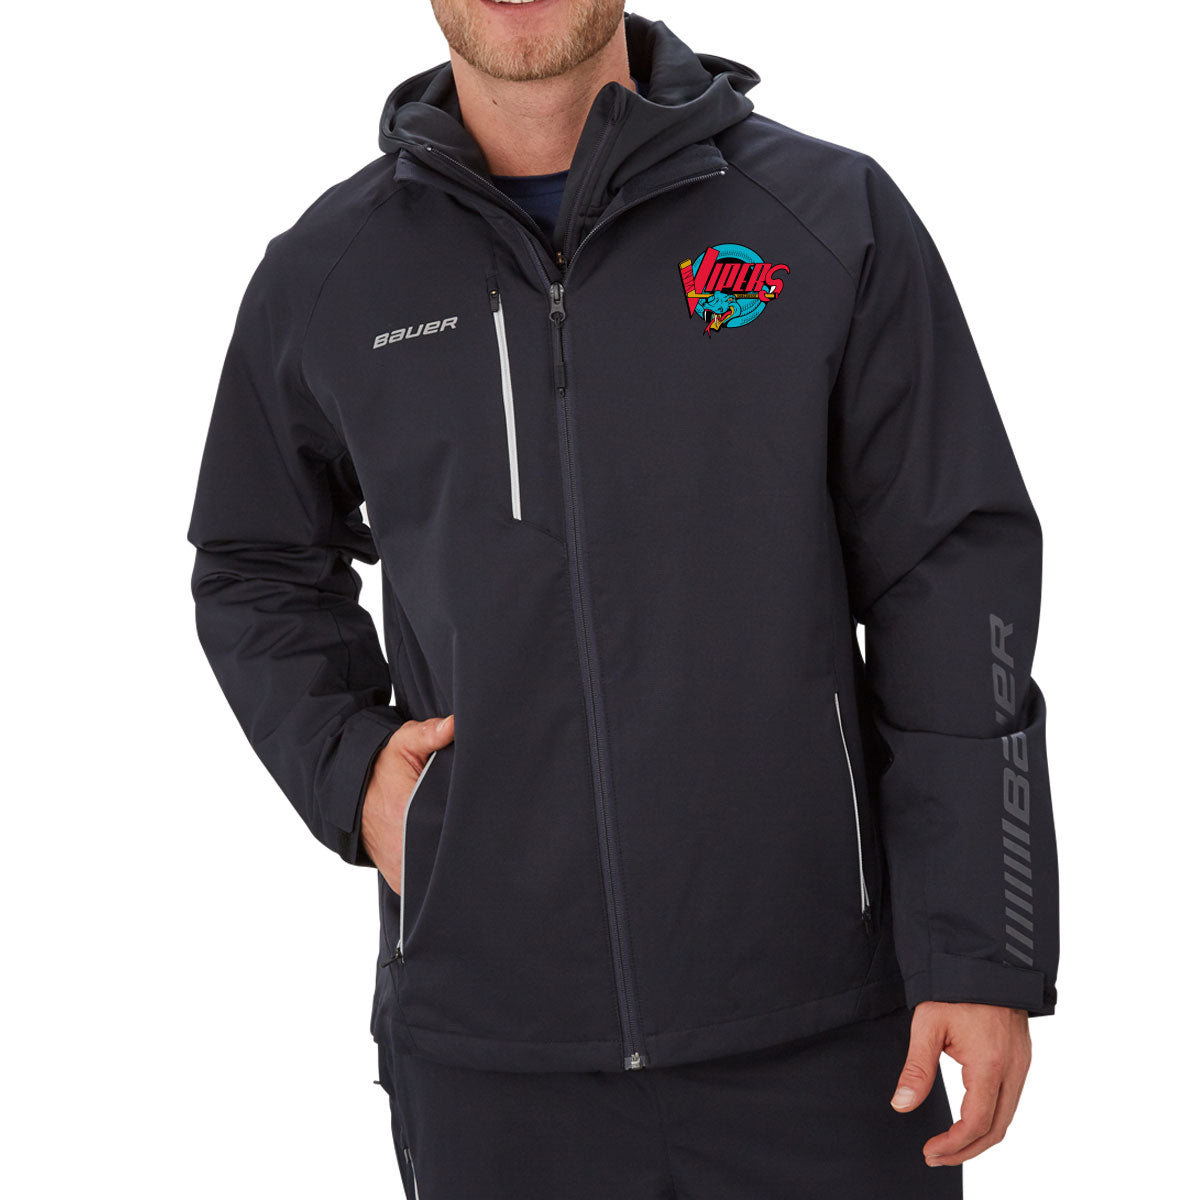 Vancouver Vipers -- Senior Bauer Lightweight Jacket